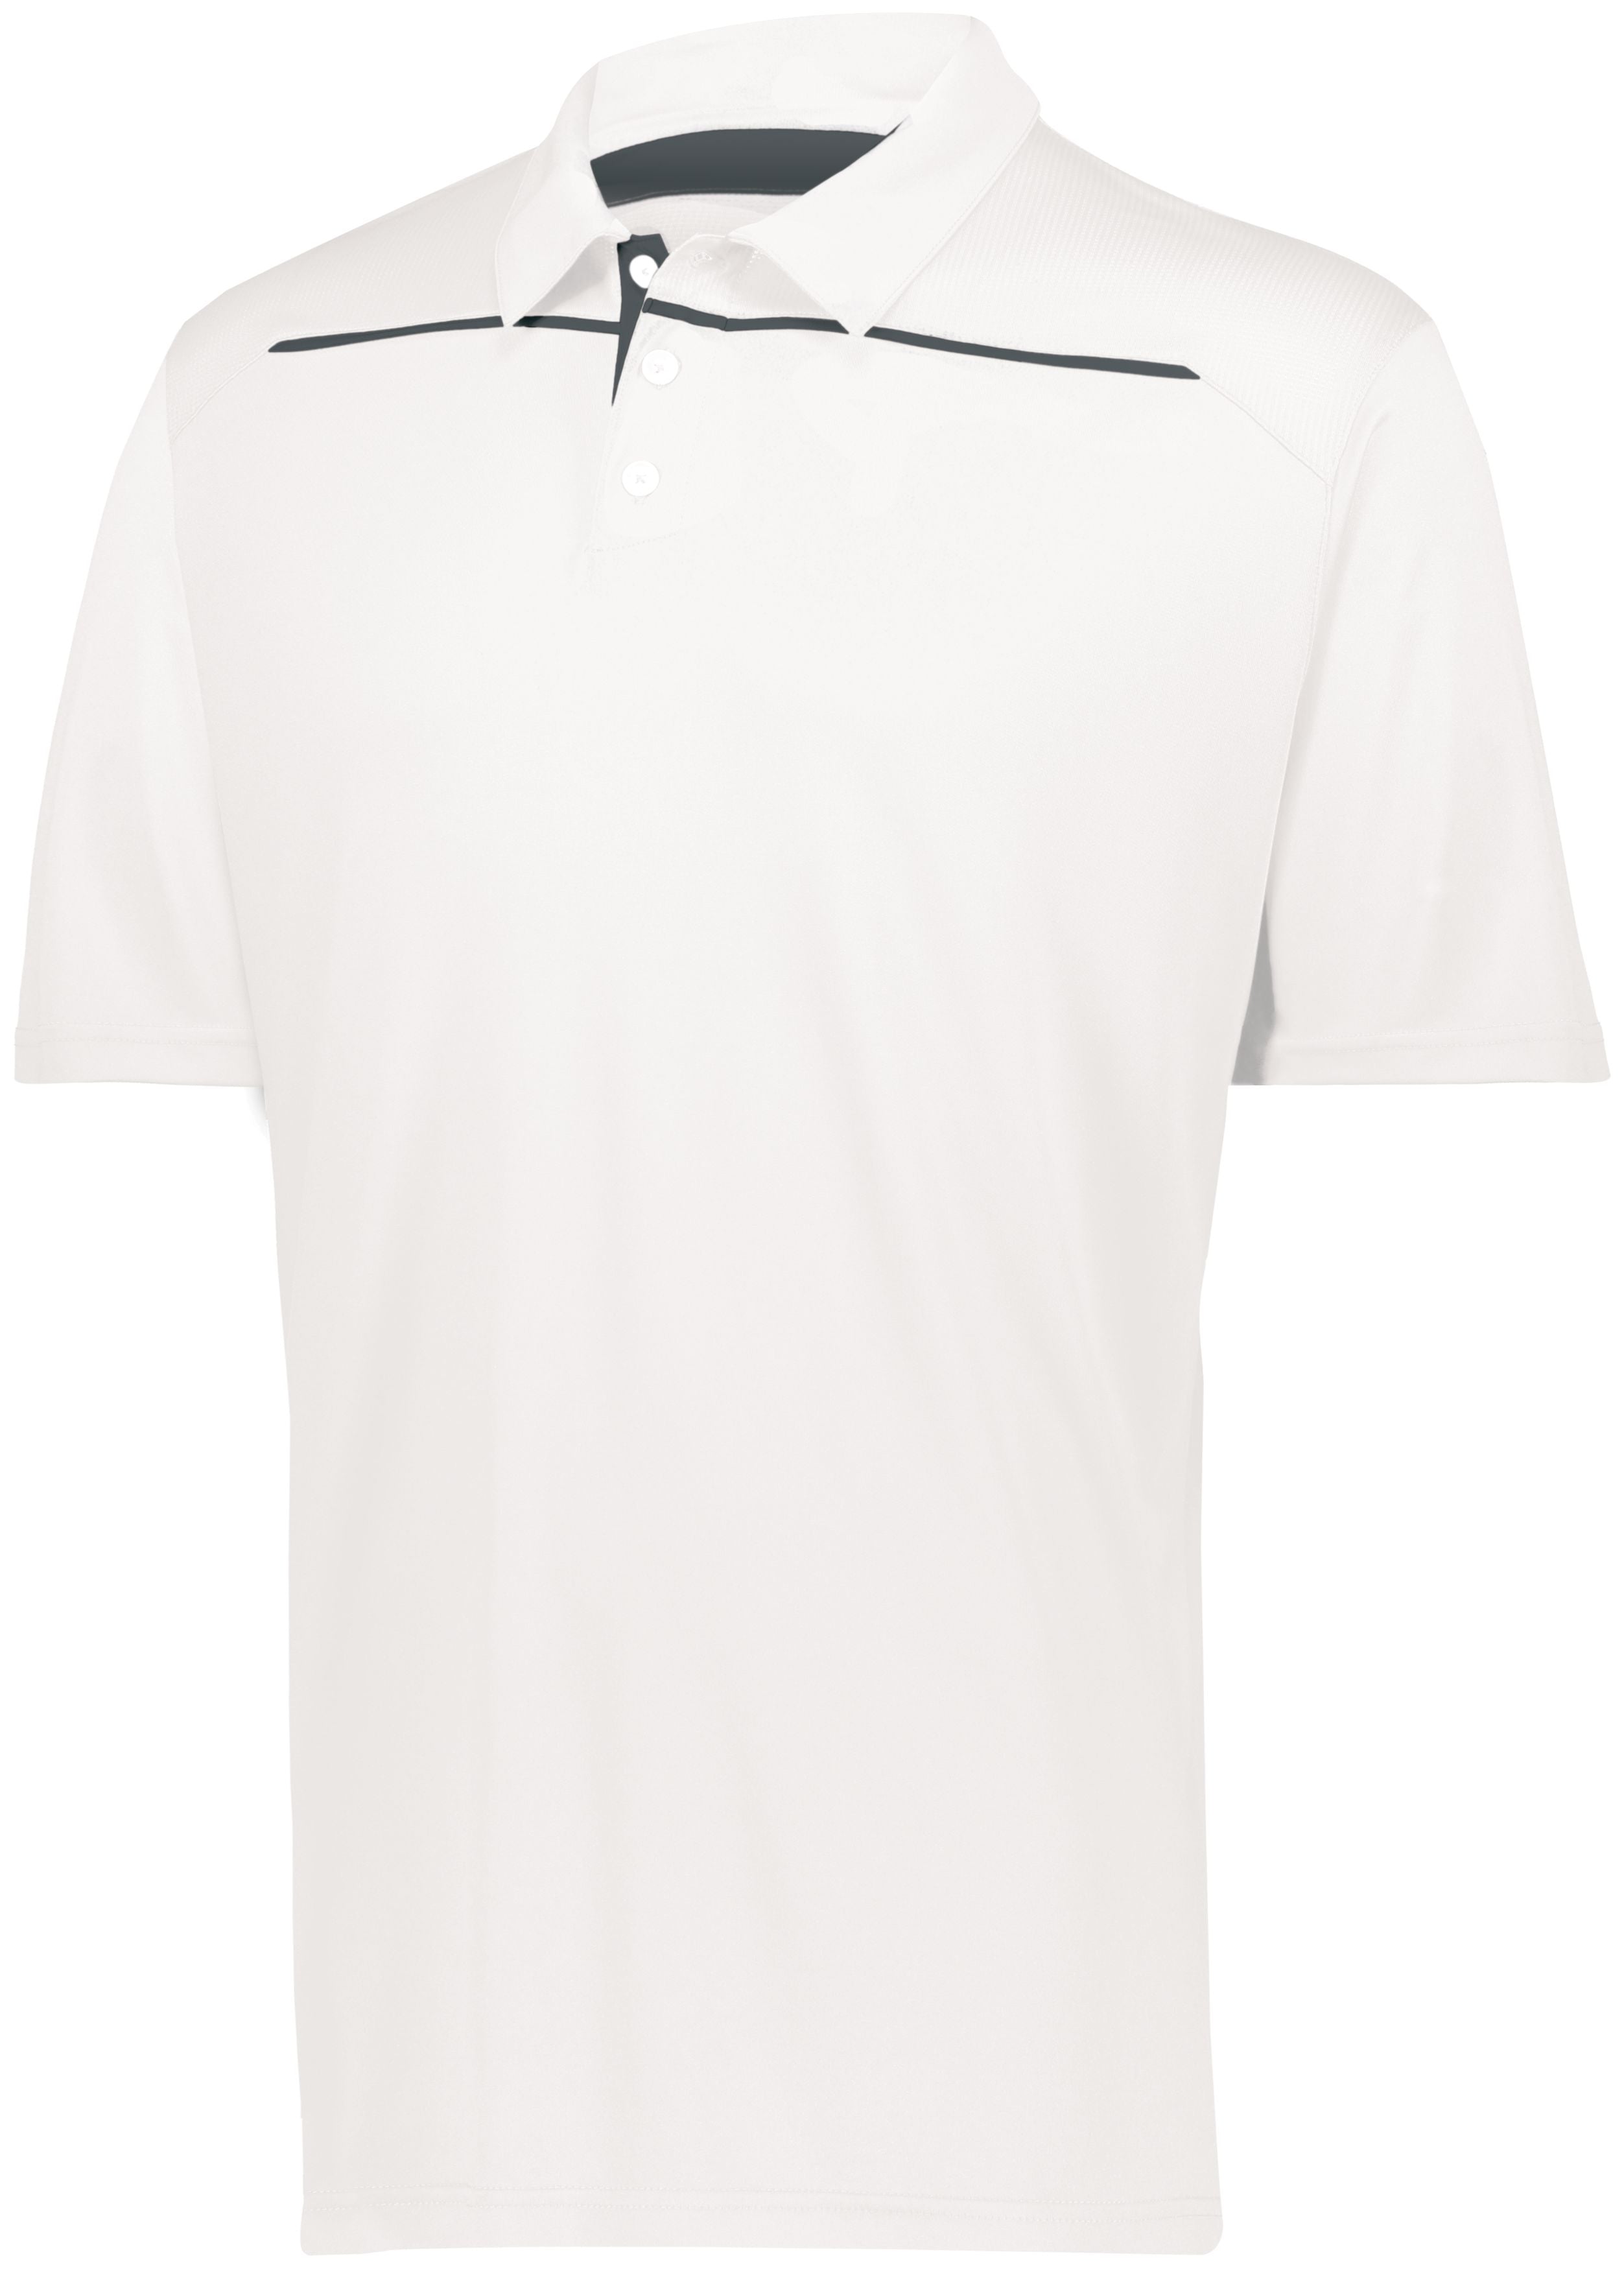 Holloway Defer Polo in White/Graphite  -Part of the Adult, Adult-Polos, Polos, Holloway, Shirts product lines at KanaleyCreations.com